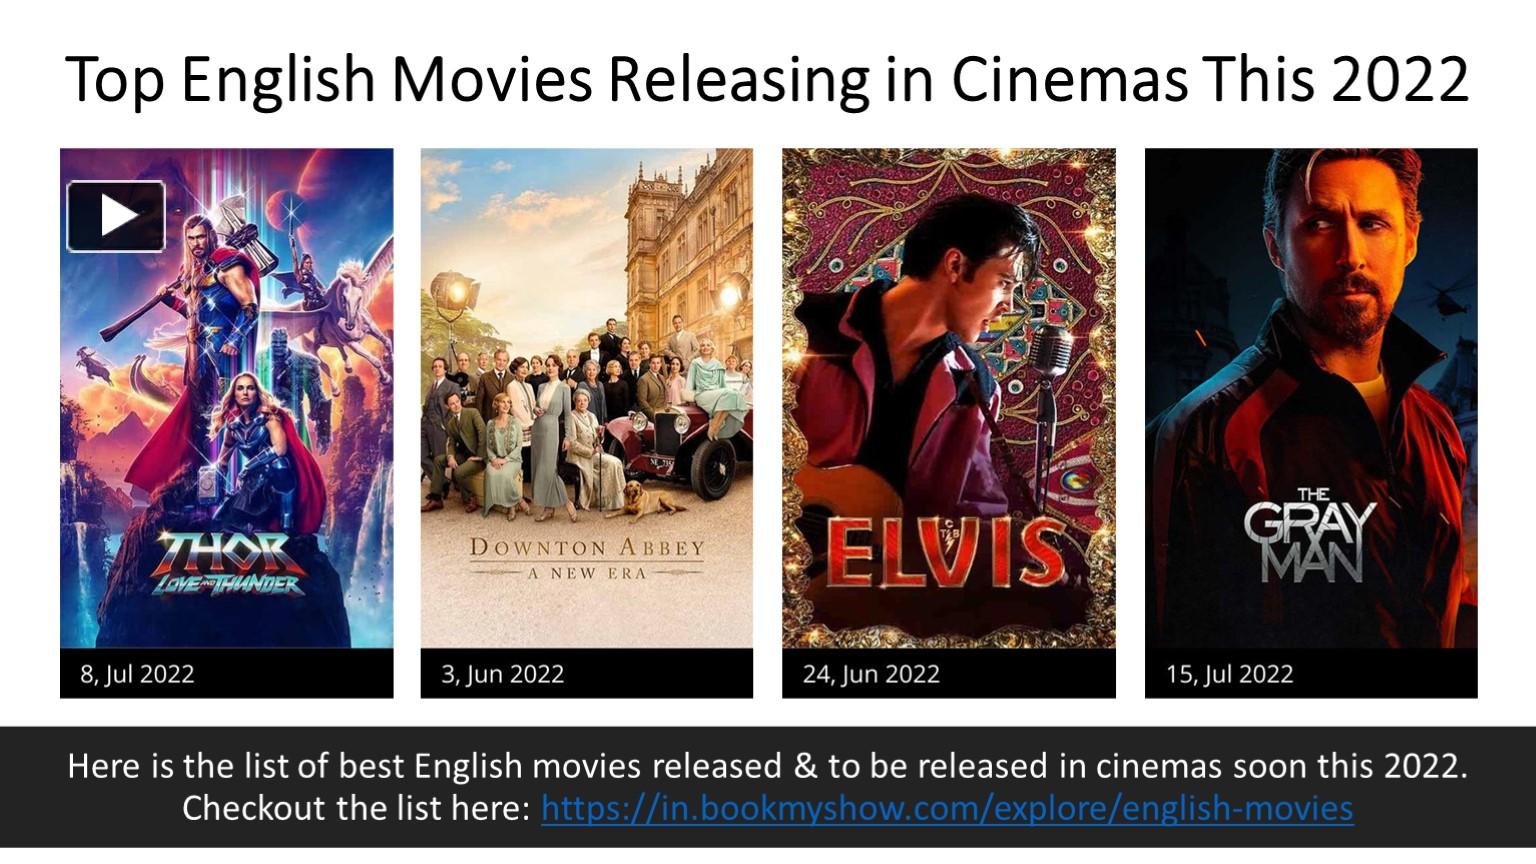 PPT Checkout the best English Movies Releasing Soon in Cinemas Near